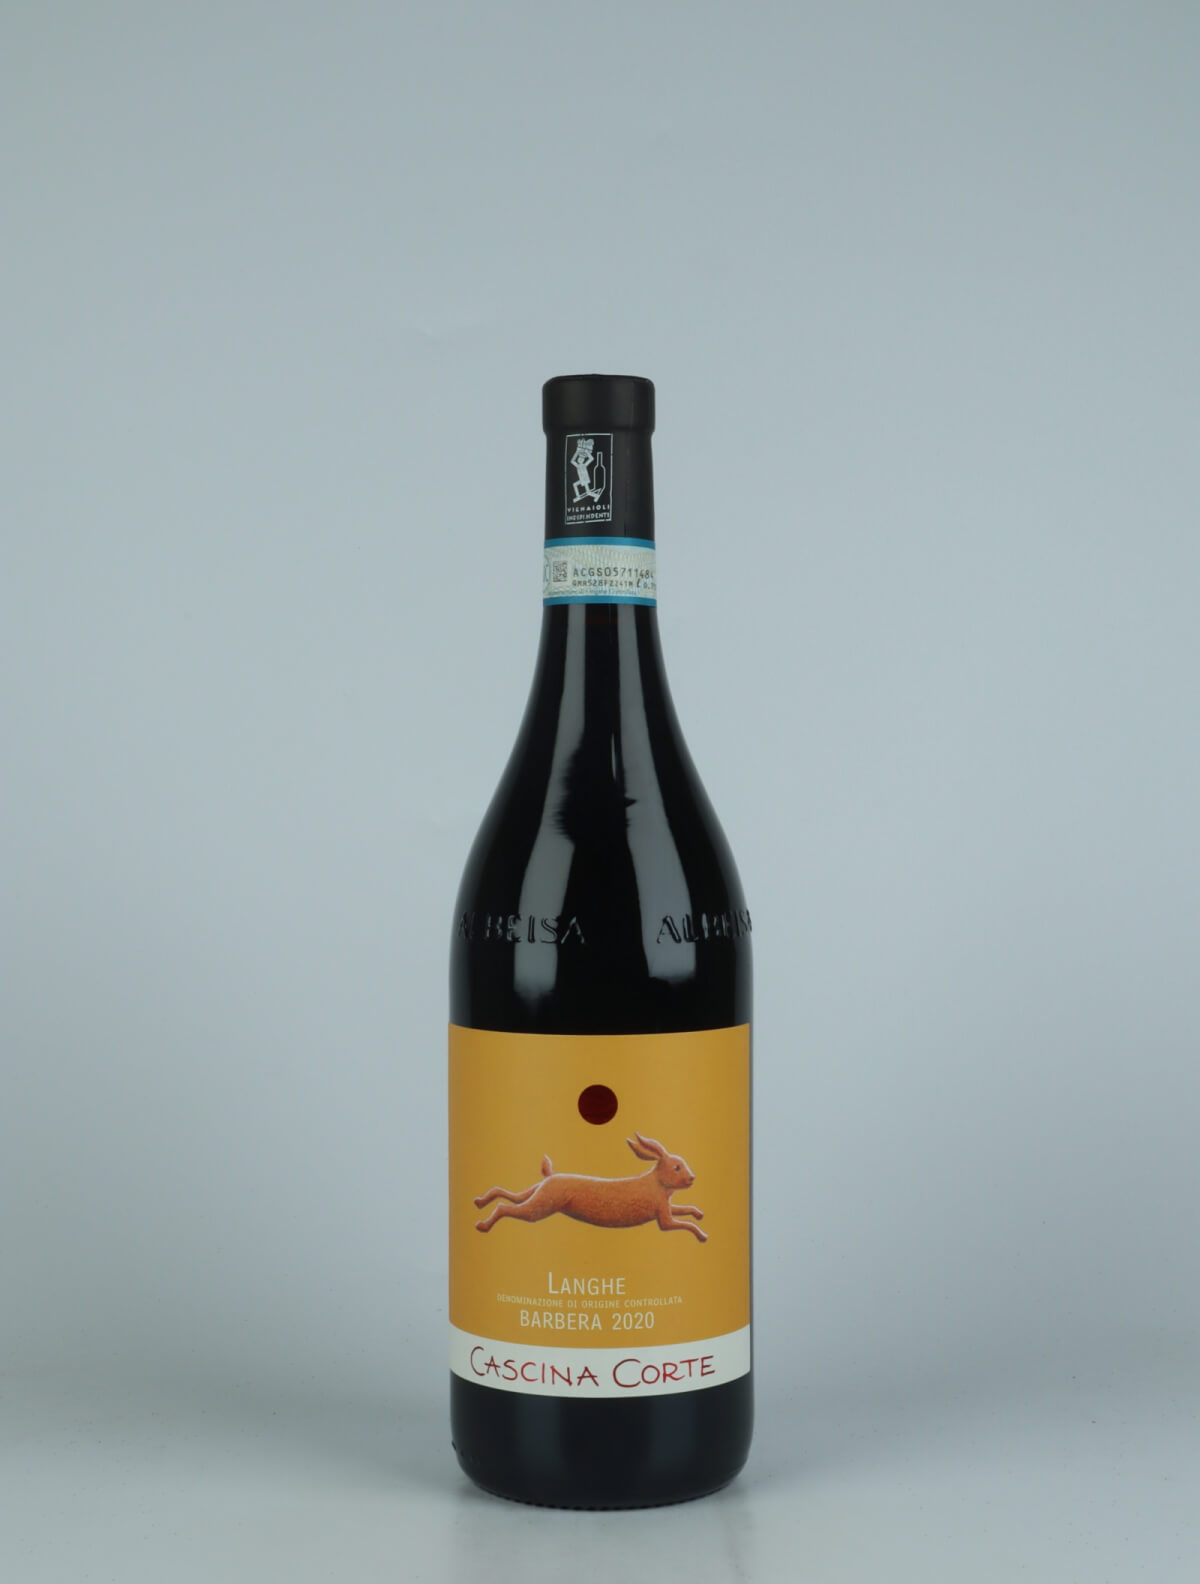 A bottle 2020 Barbera Red wine from Cascina Corte, Piedmont in Italy